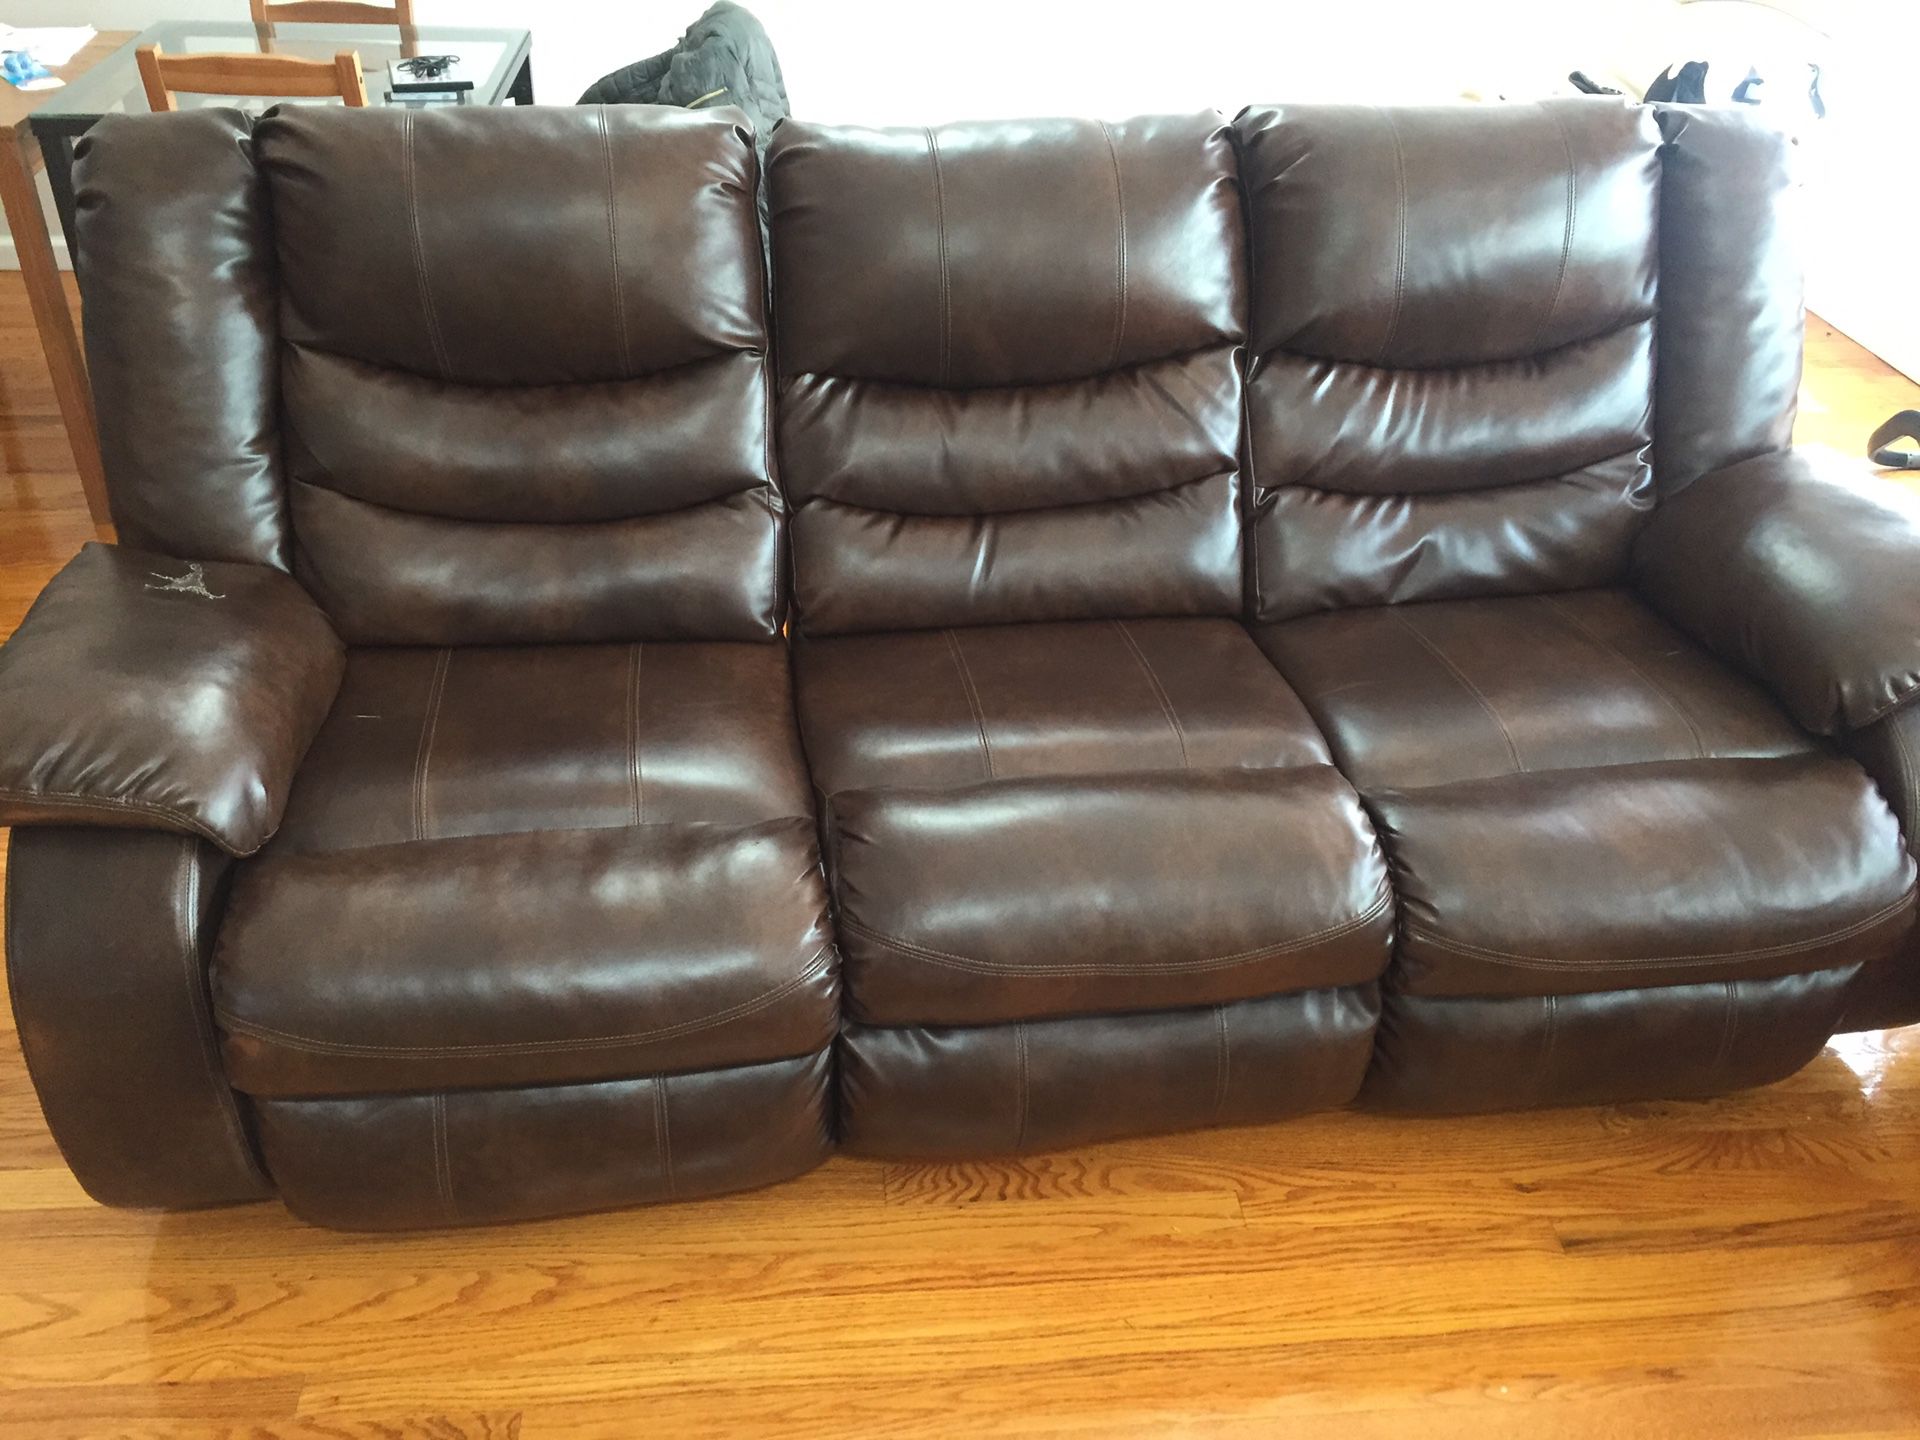 Faux leather couch PICK UP ONLY.